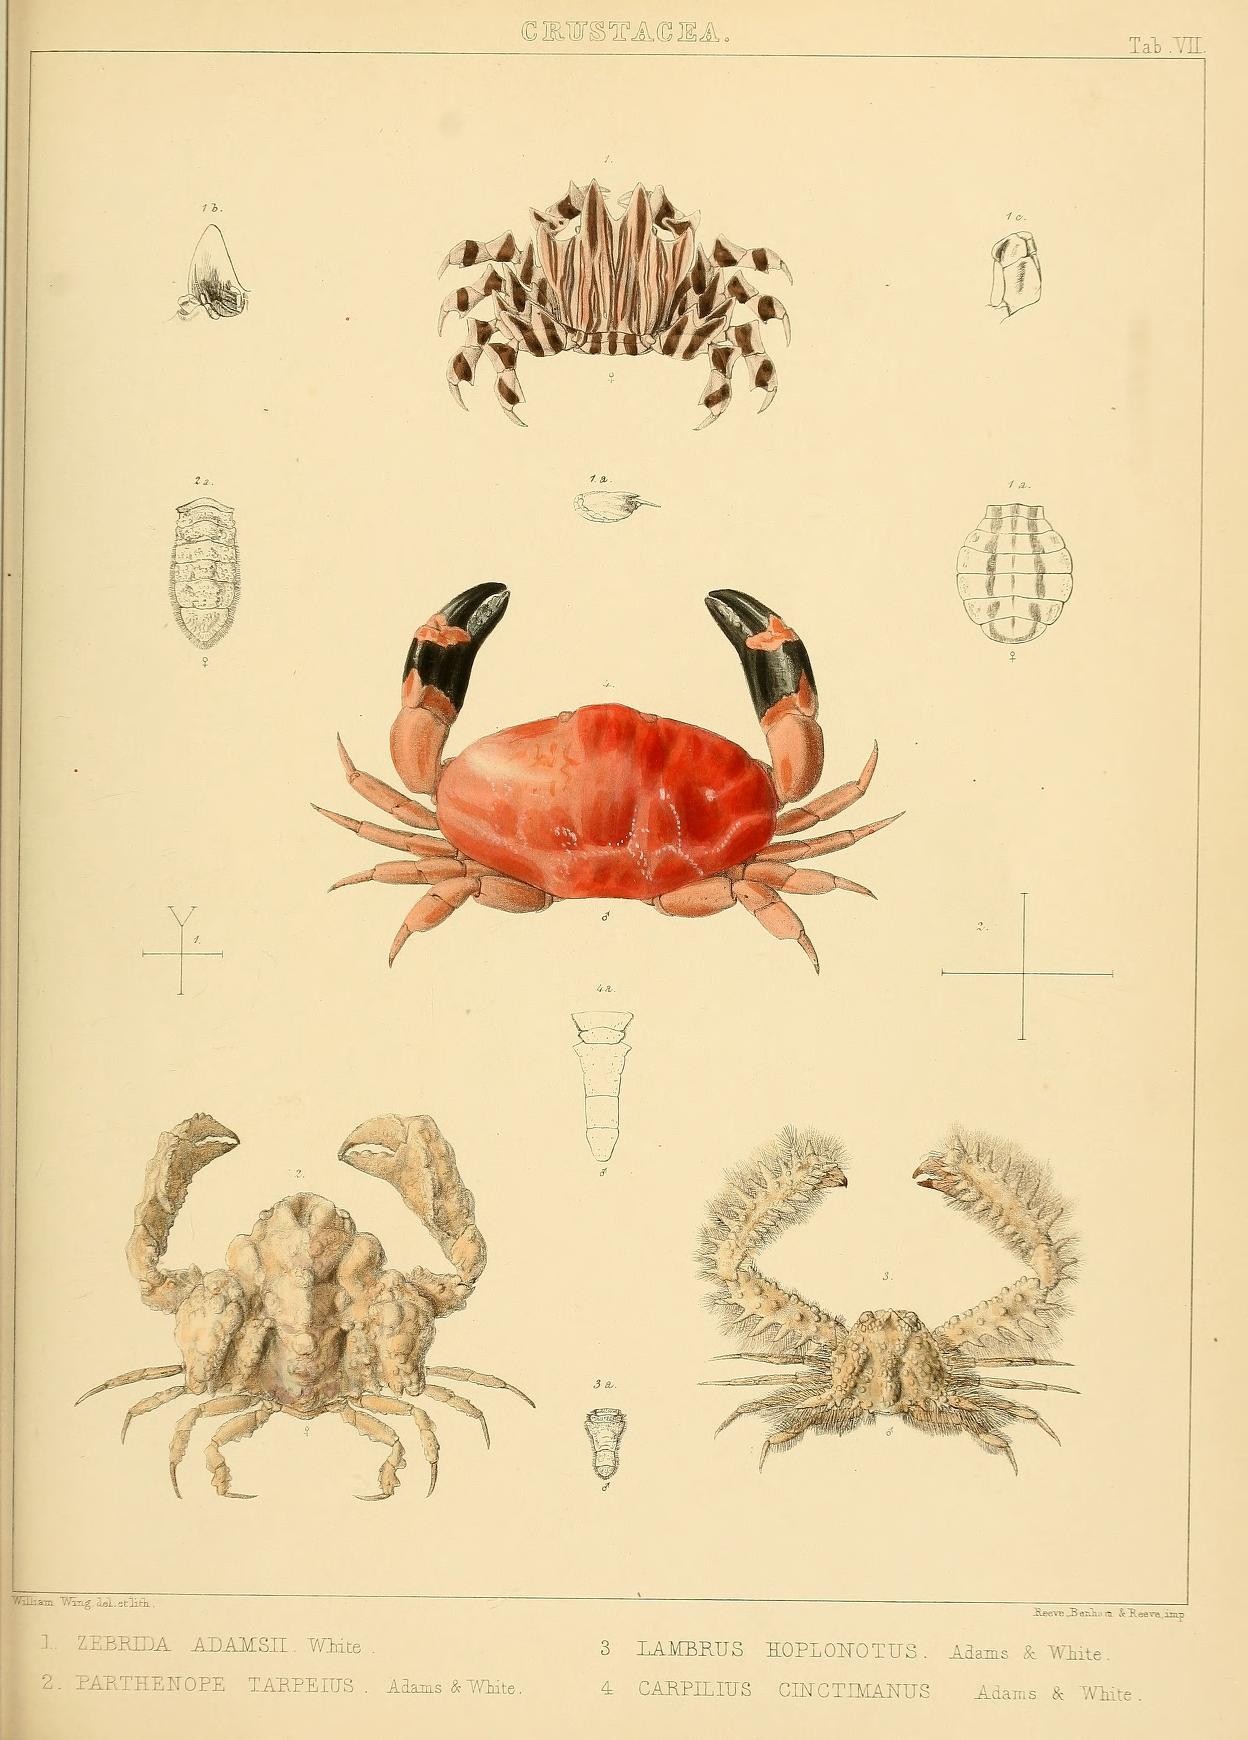 a red crab with black spots and other marine creatures